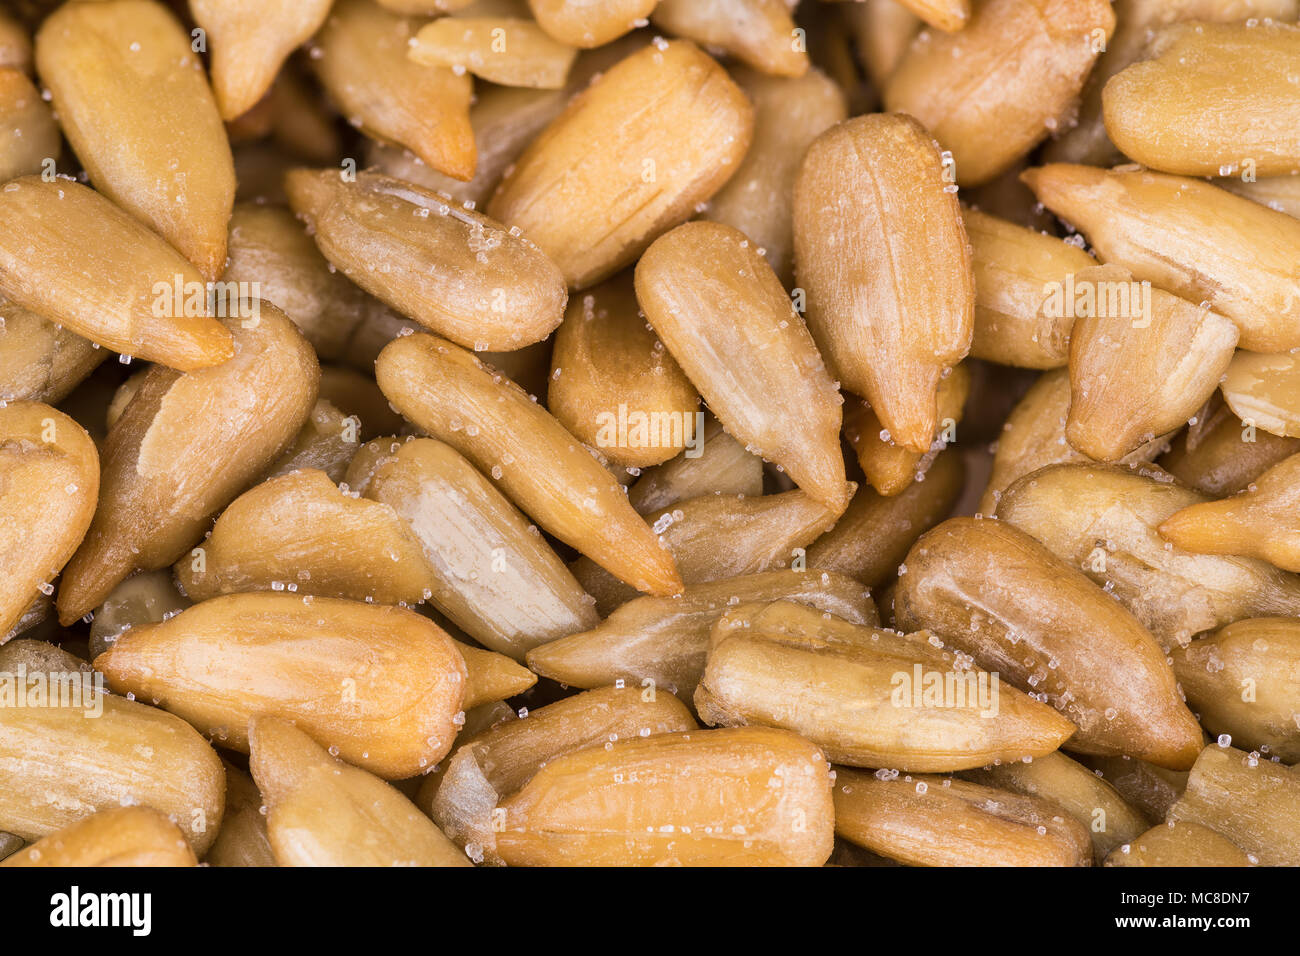 Close-up of salted sunflower seeds as a culinary background. Helianthus. Decorative texture from pile of roasted grains sprinkled by crystals of salt. Stock Photo